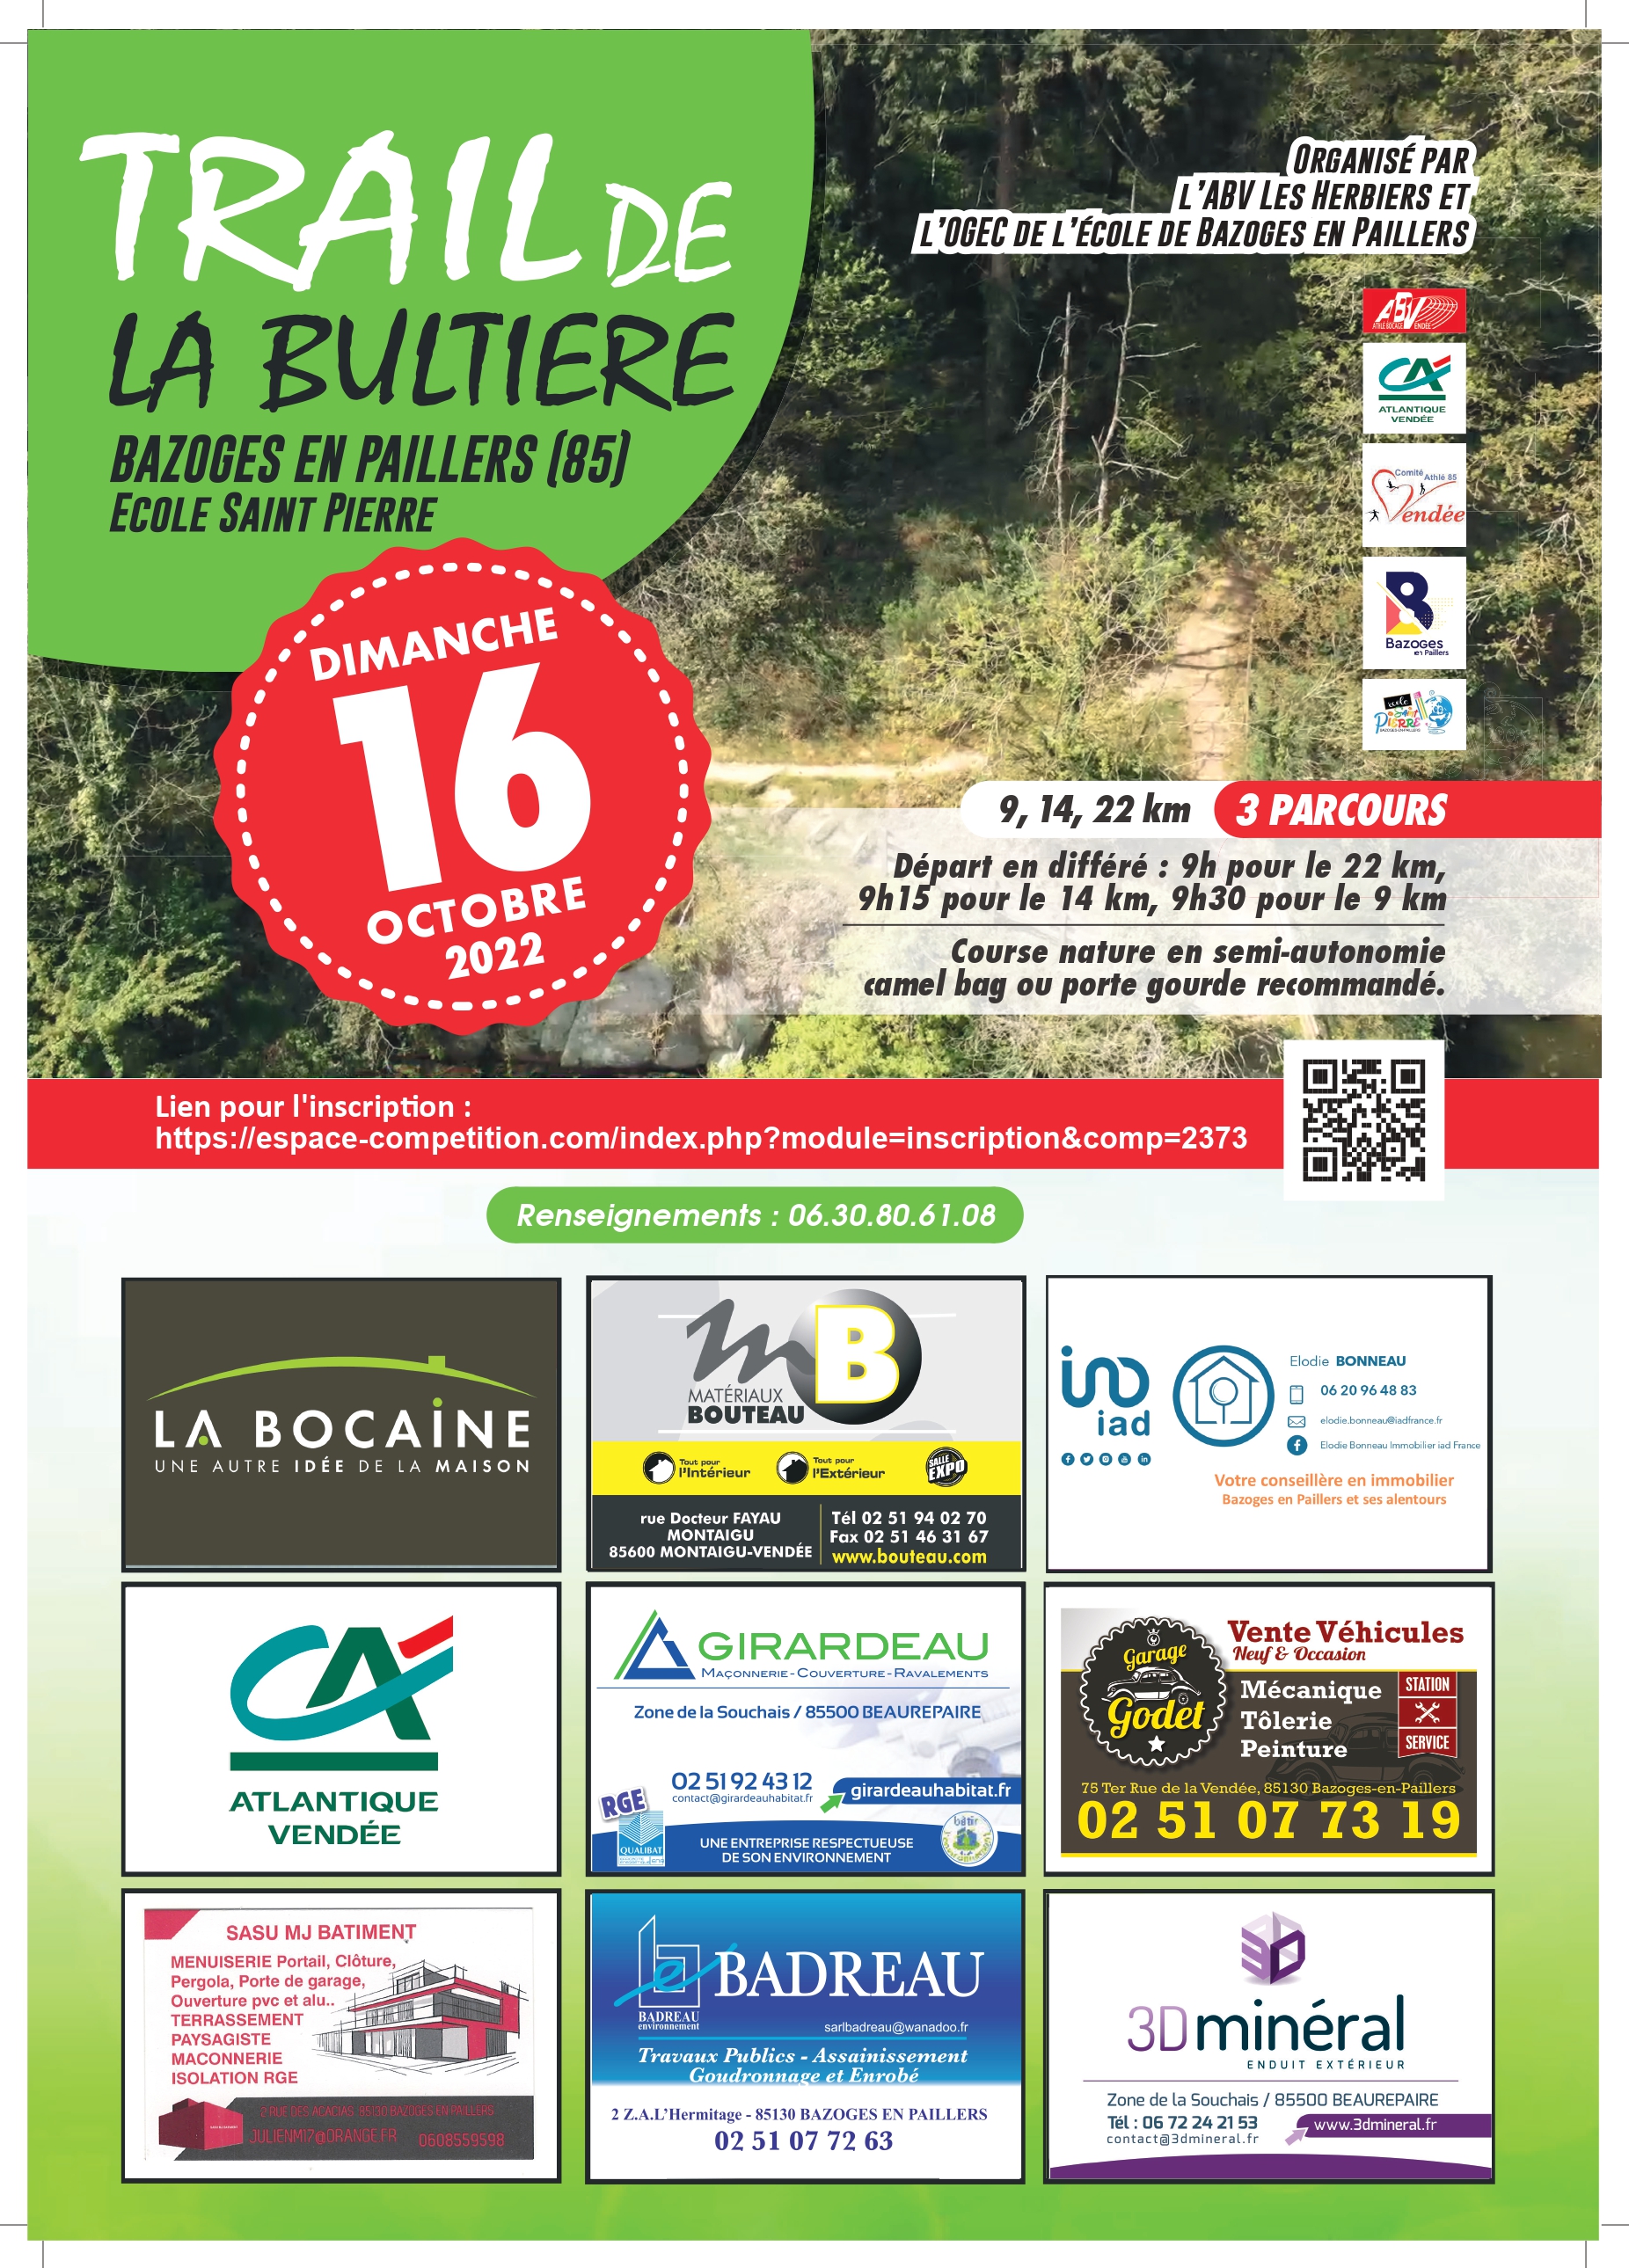 TRAILBAZOGES Affiches2022 A3 HD 1 page 0001 1